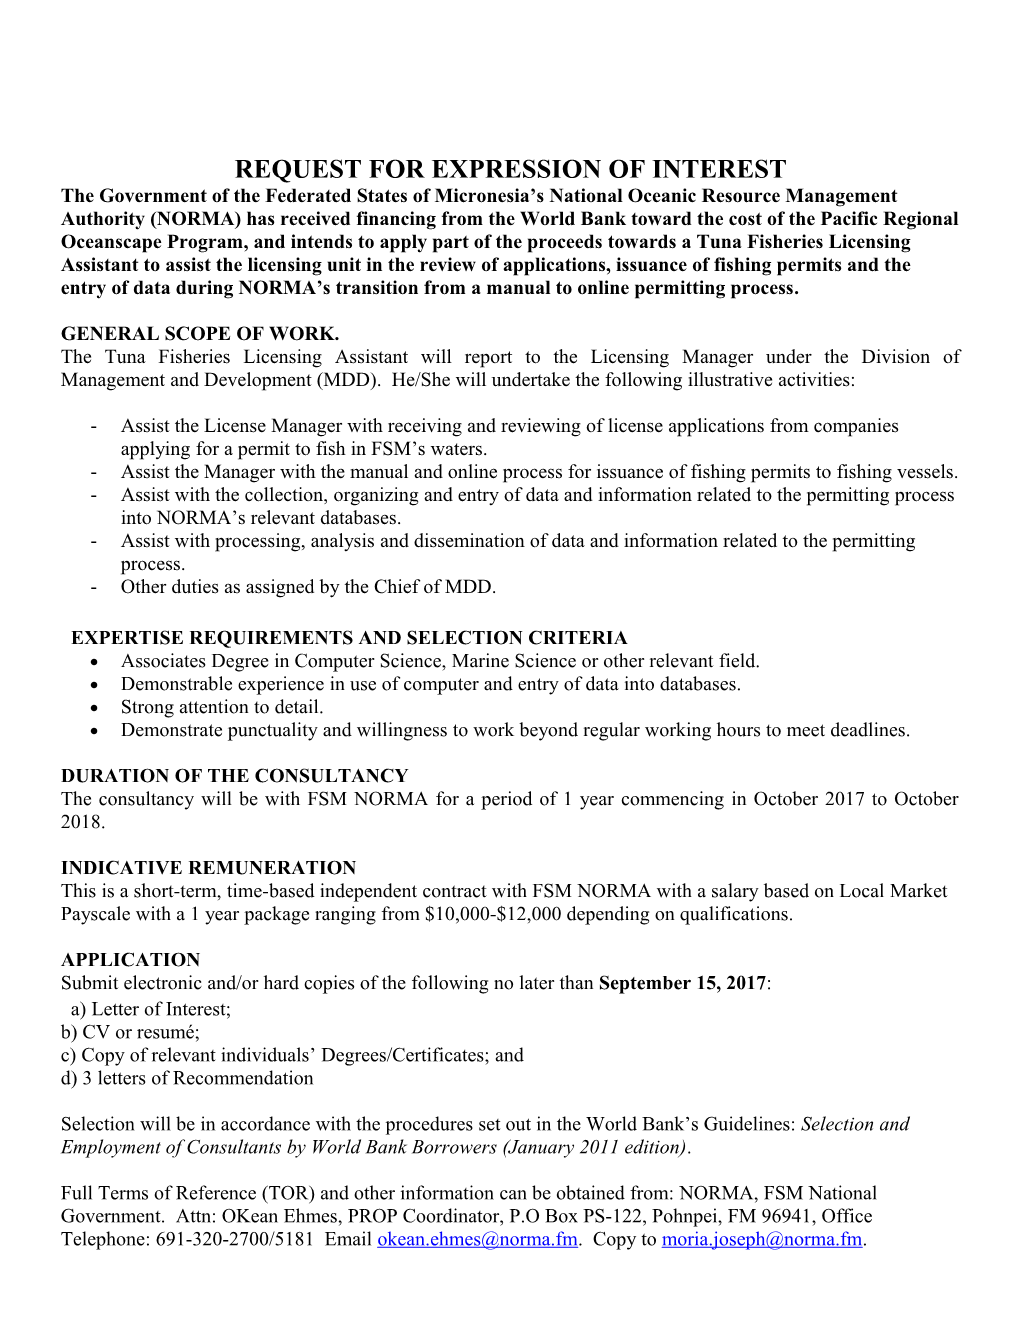 Request for Expression of Interest s1